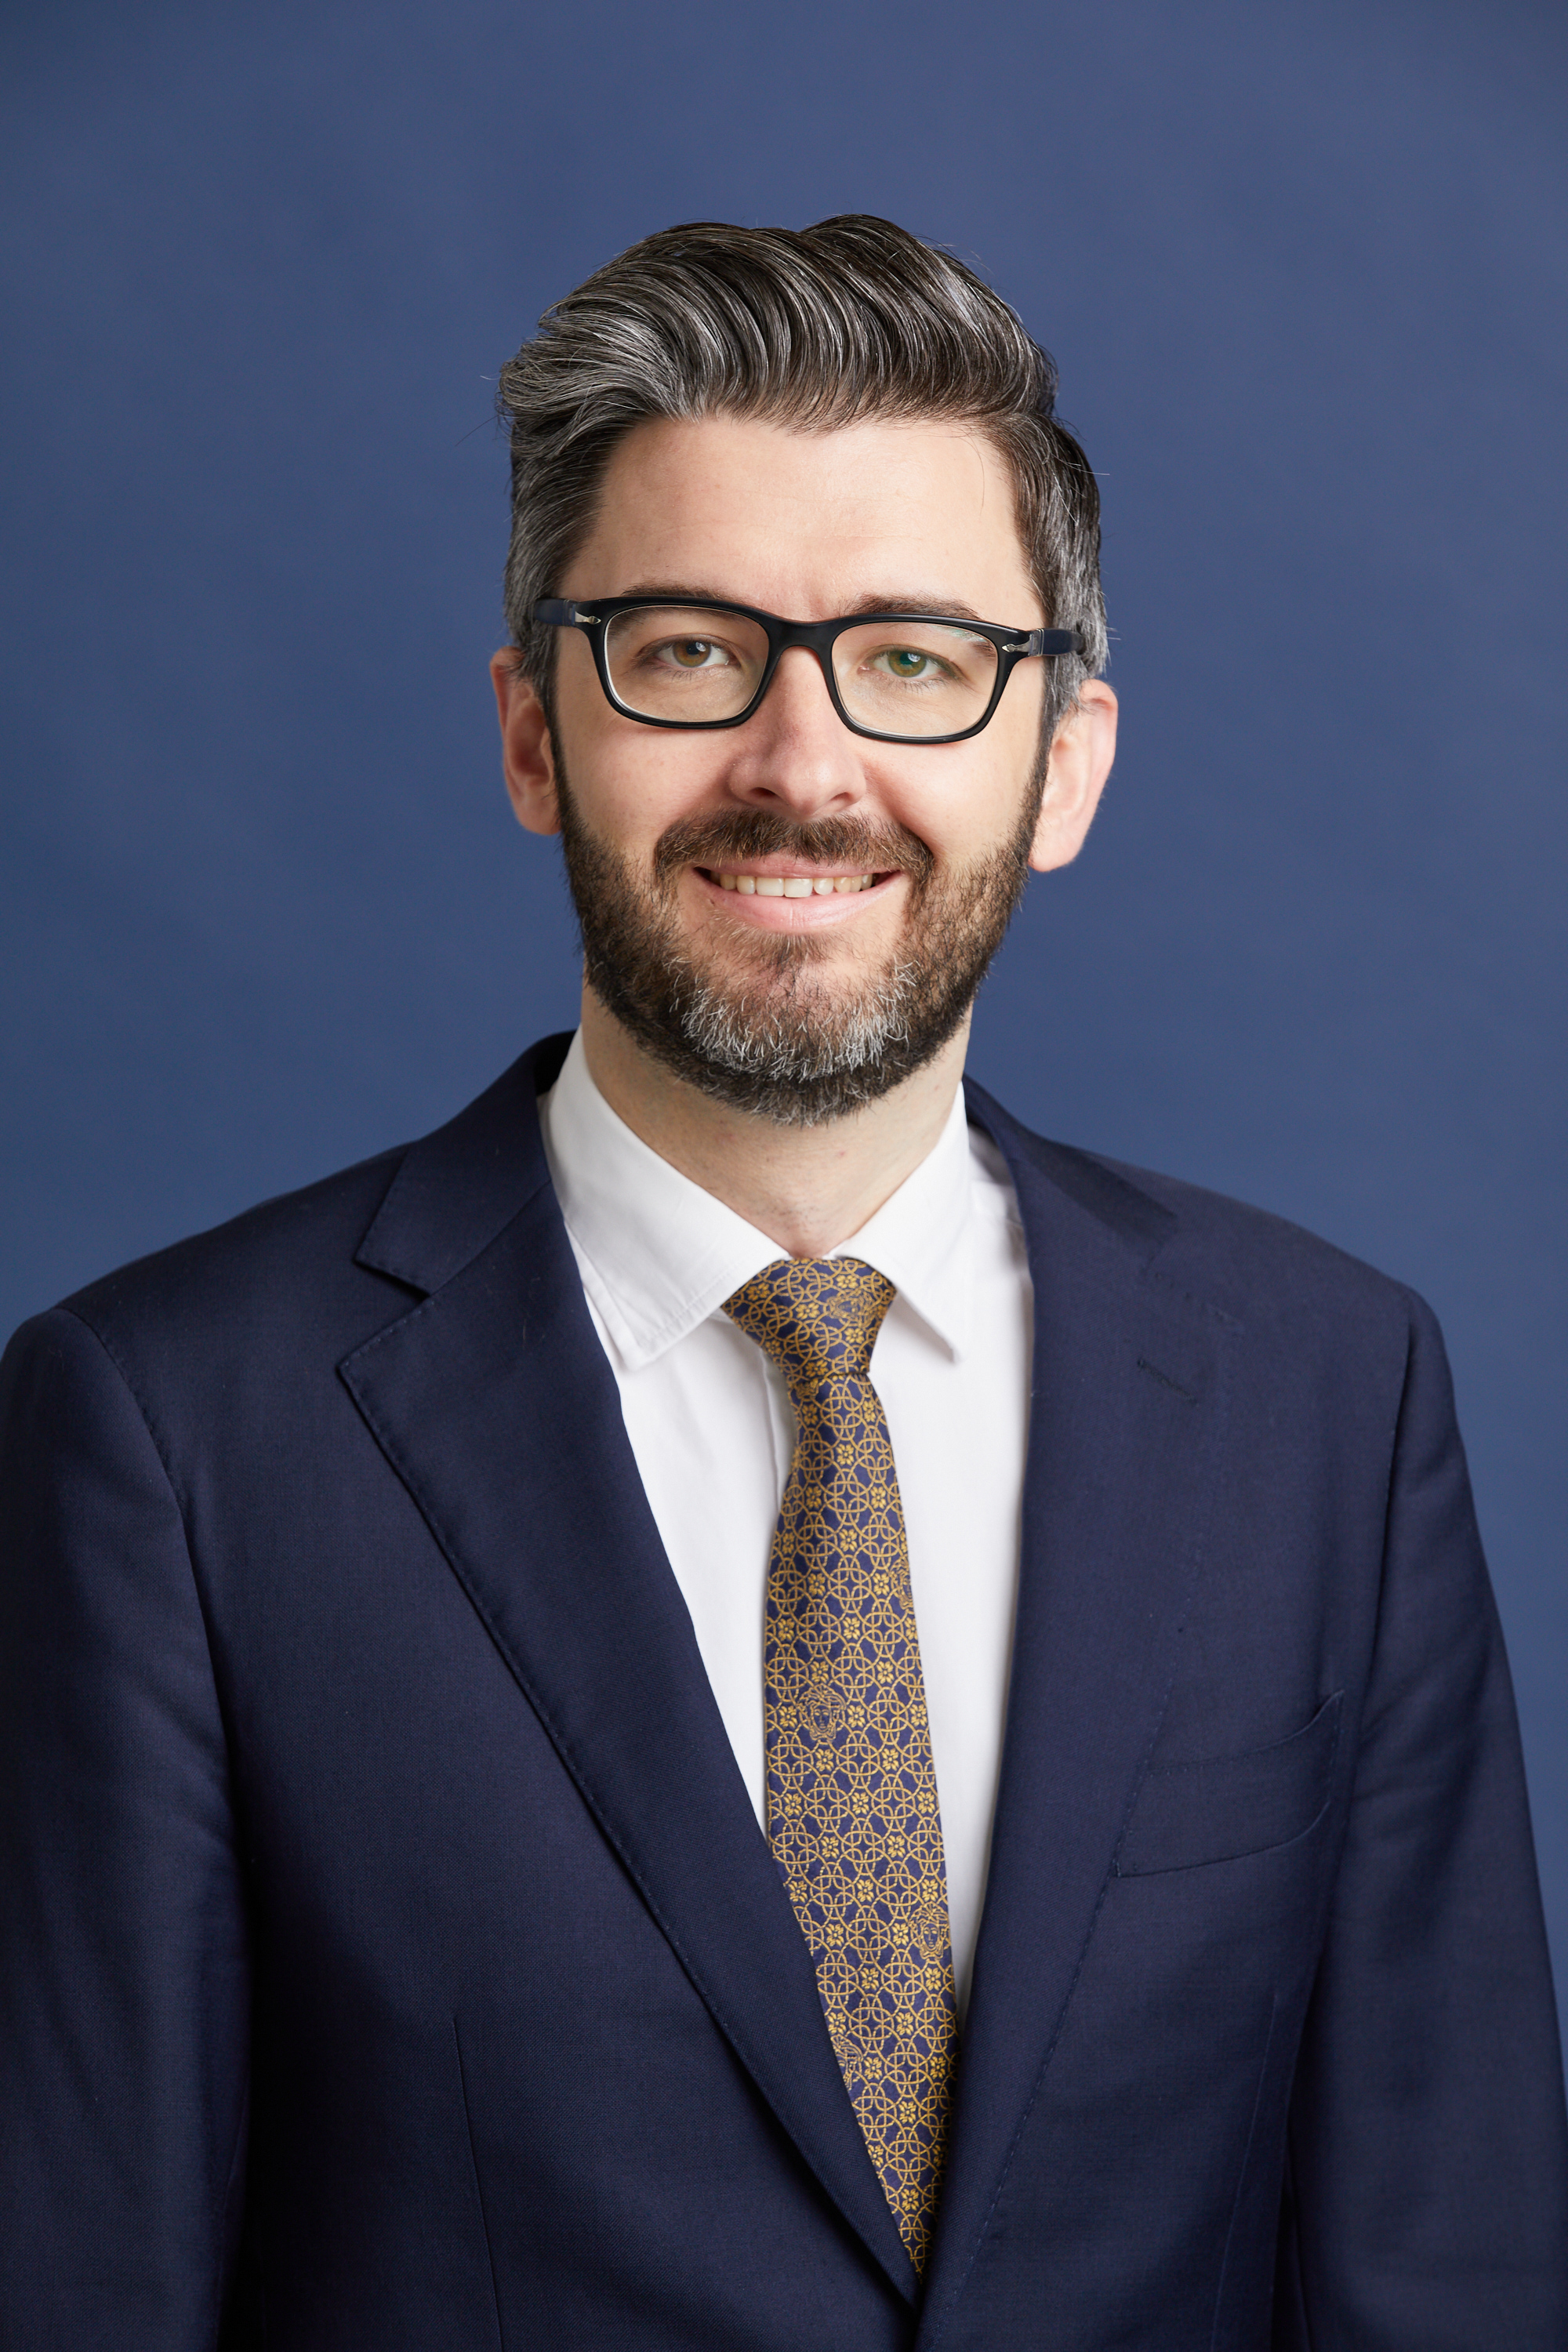 Curtis Ward - a person (he/him) with glasses, a beard and smiling, wearing a navy blue suit and tie